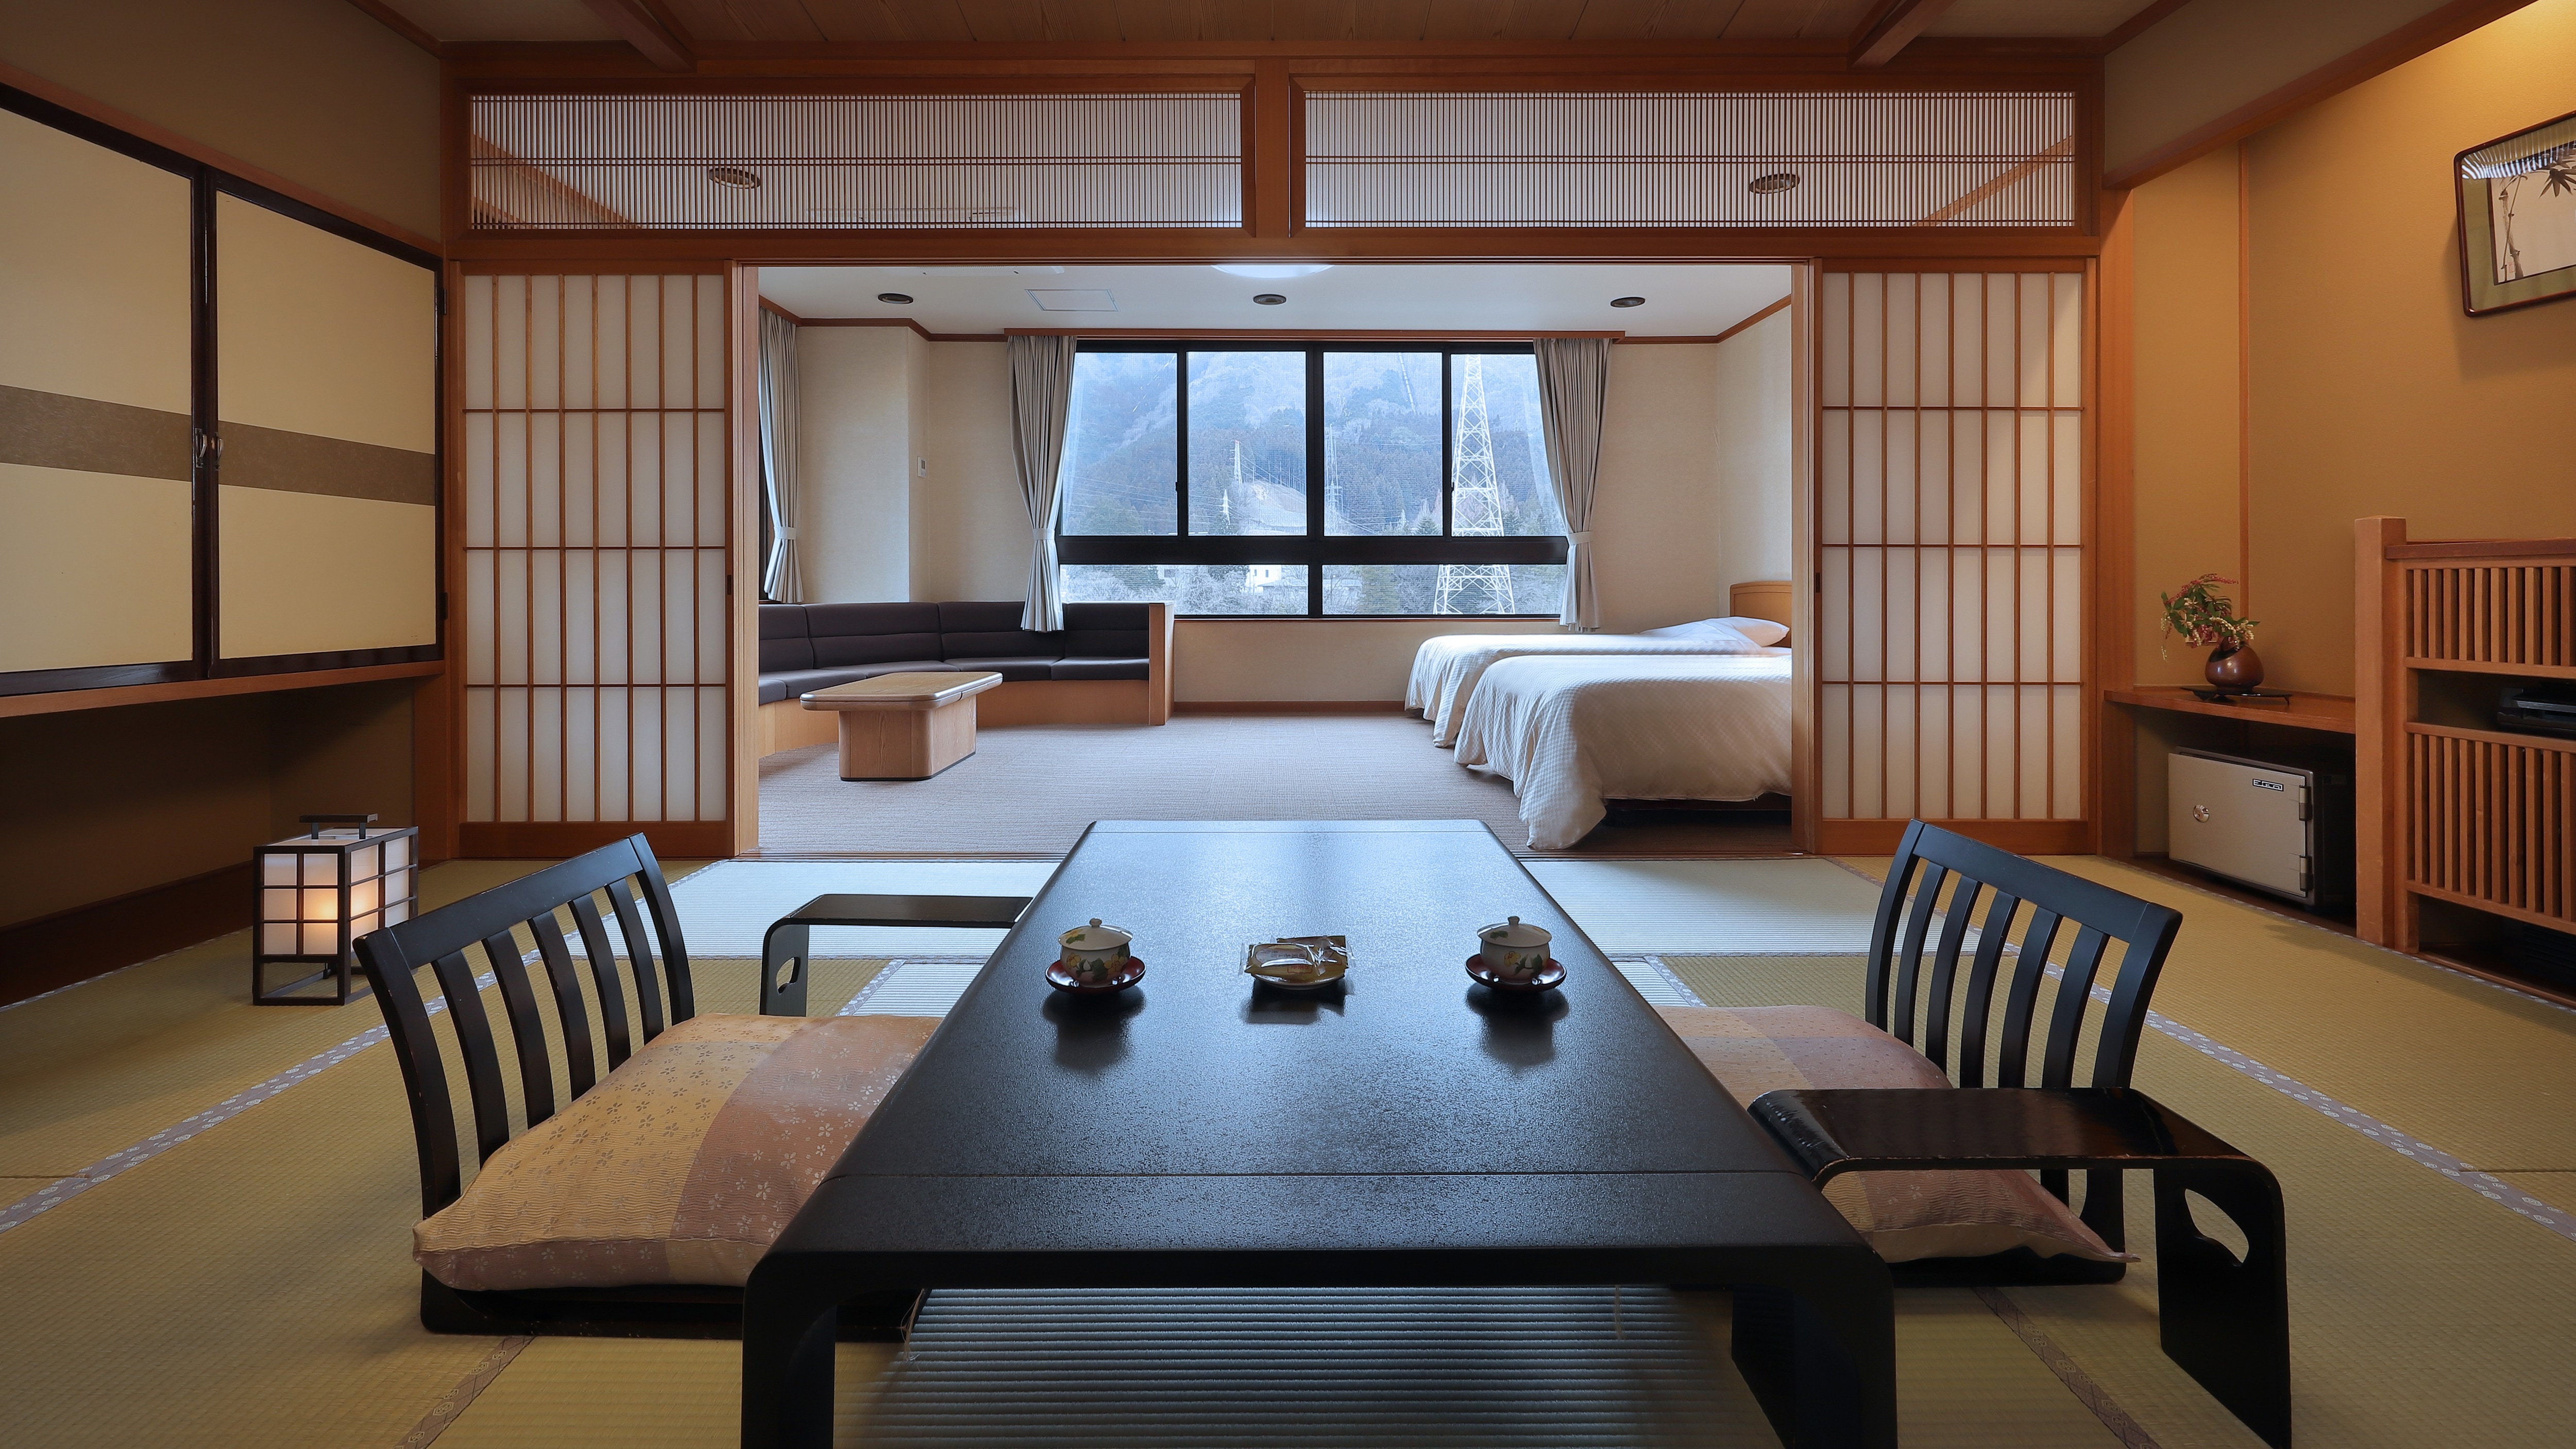 Japanese and Western rooms on the top floor (12 tatami mats + Western rooms)